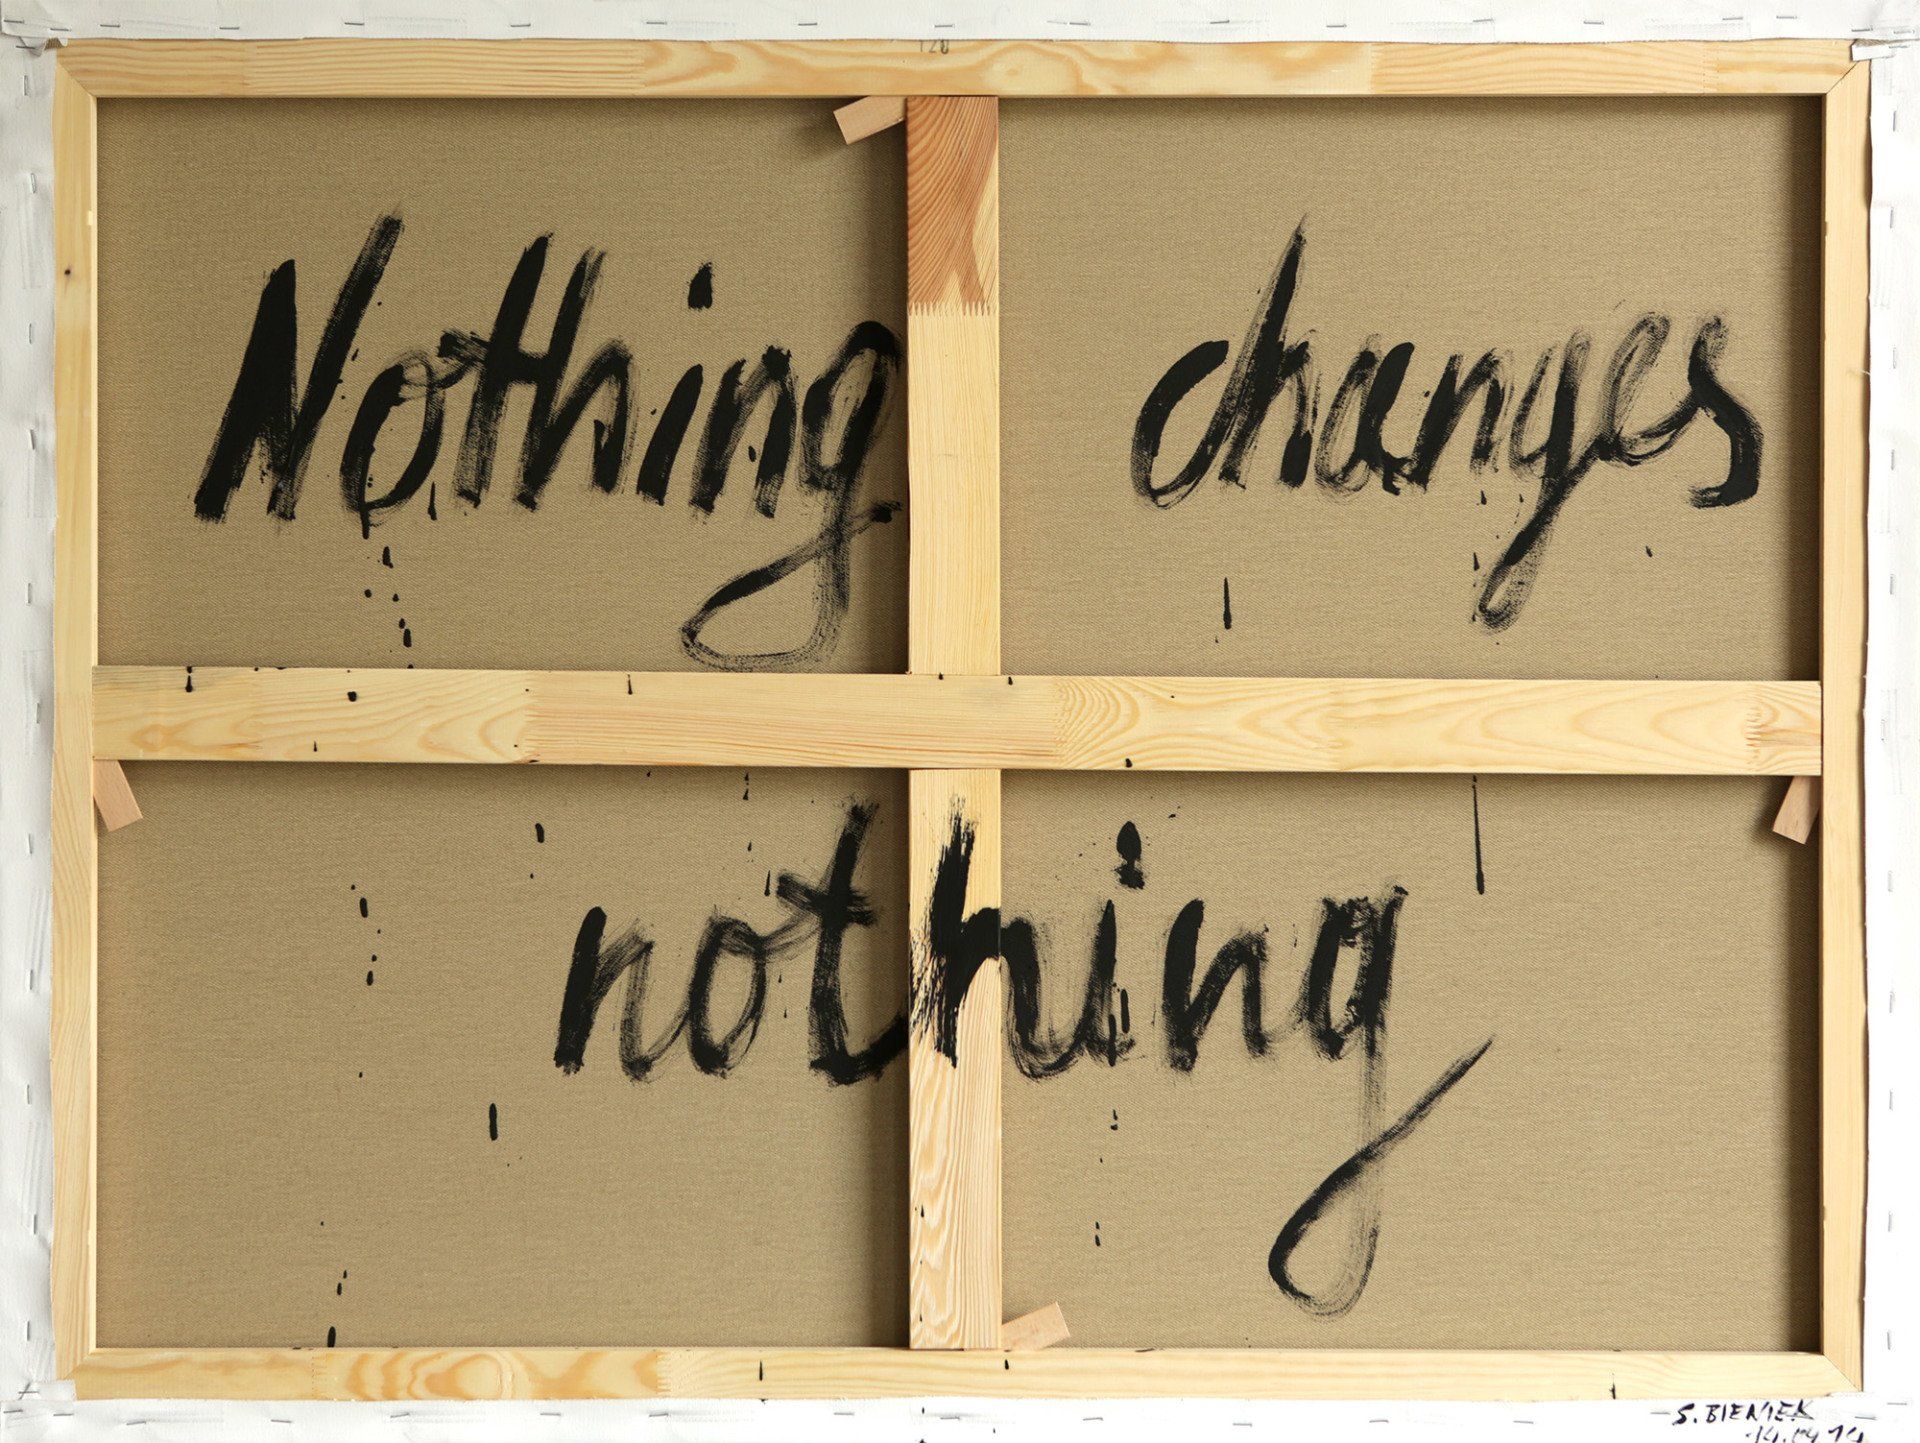 „Nothing changes nothing“ by Sebastian Bieniek (B1EN1EK), 2014. Oil on back of canvas. 90 cm. x 120 cm. From the oeuvre of Bieniek-Text and part of the 